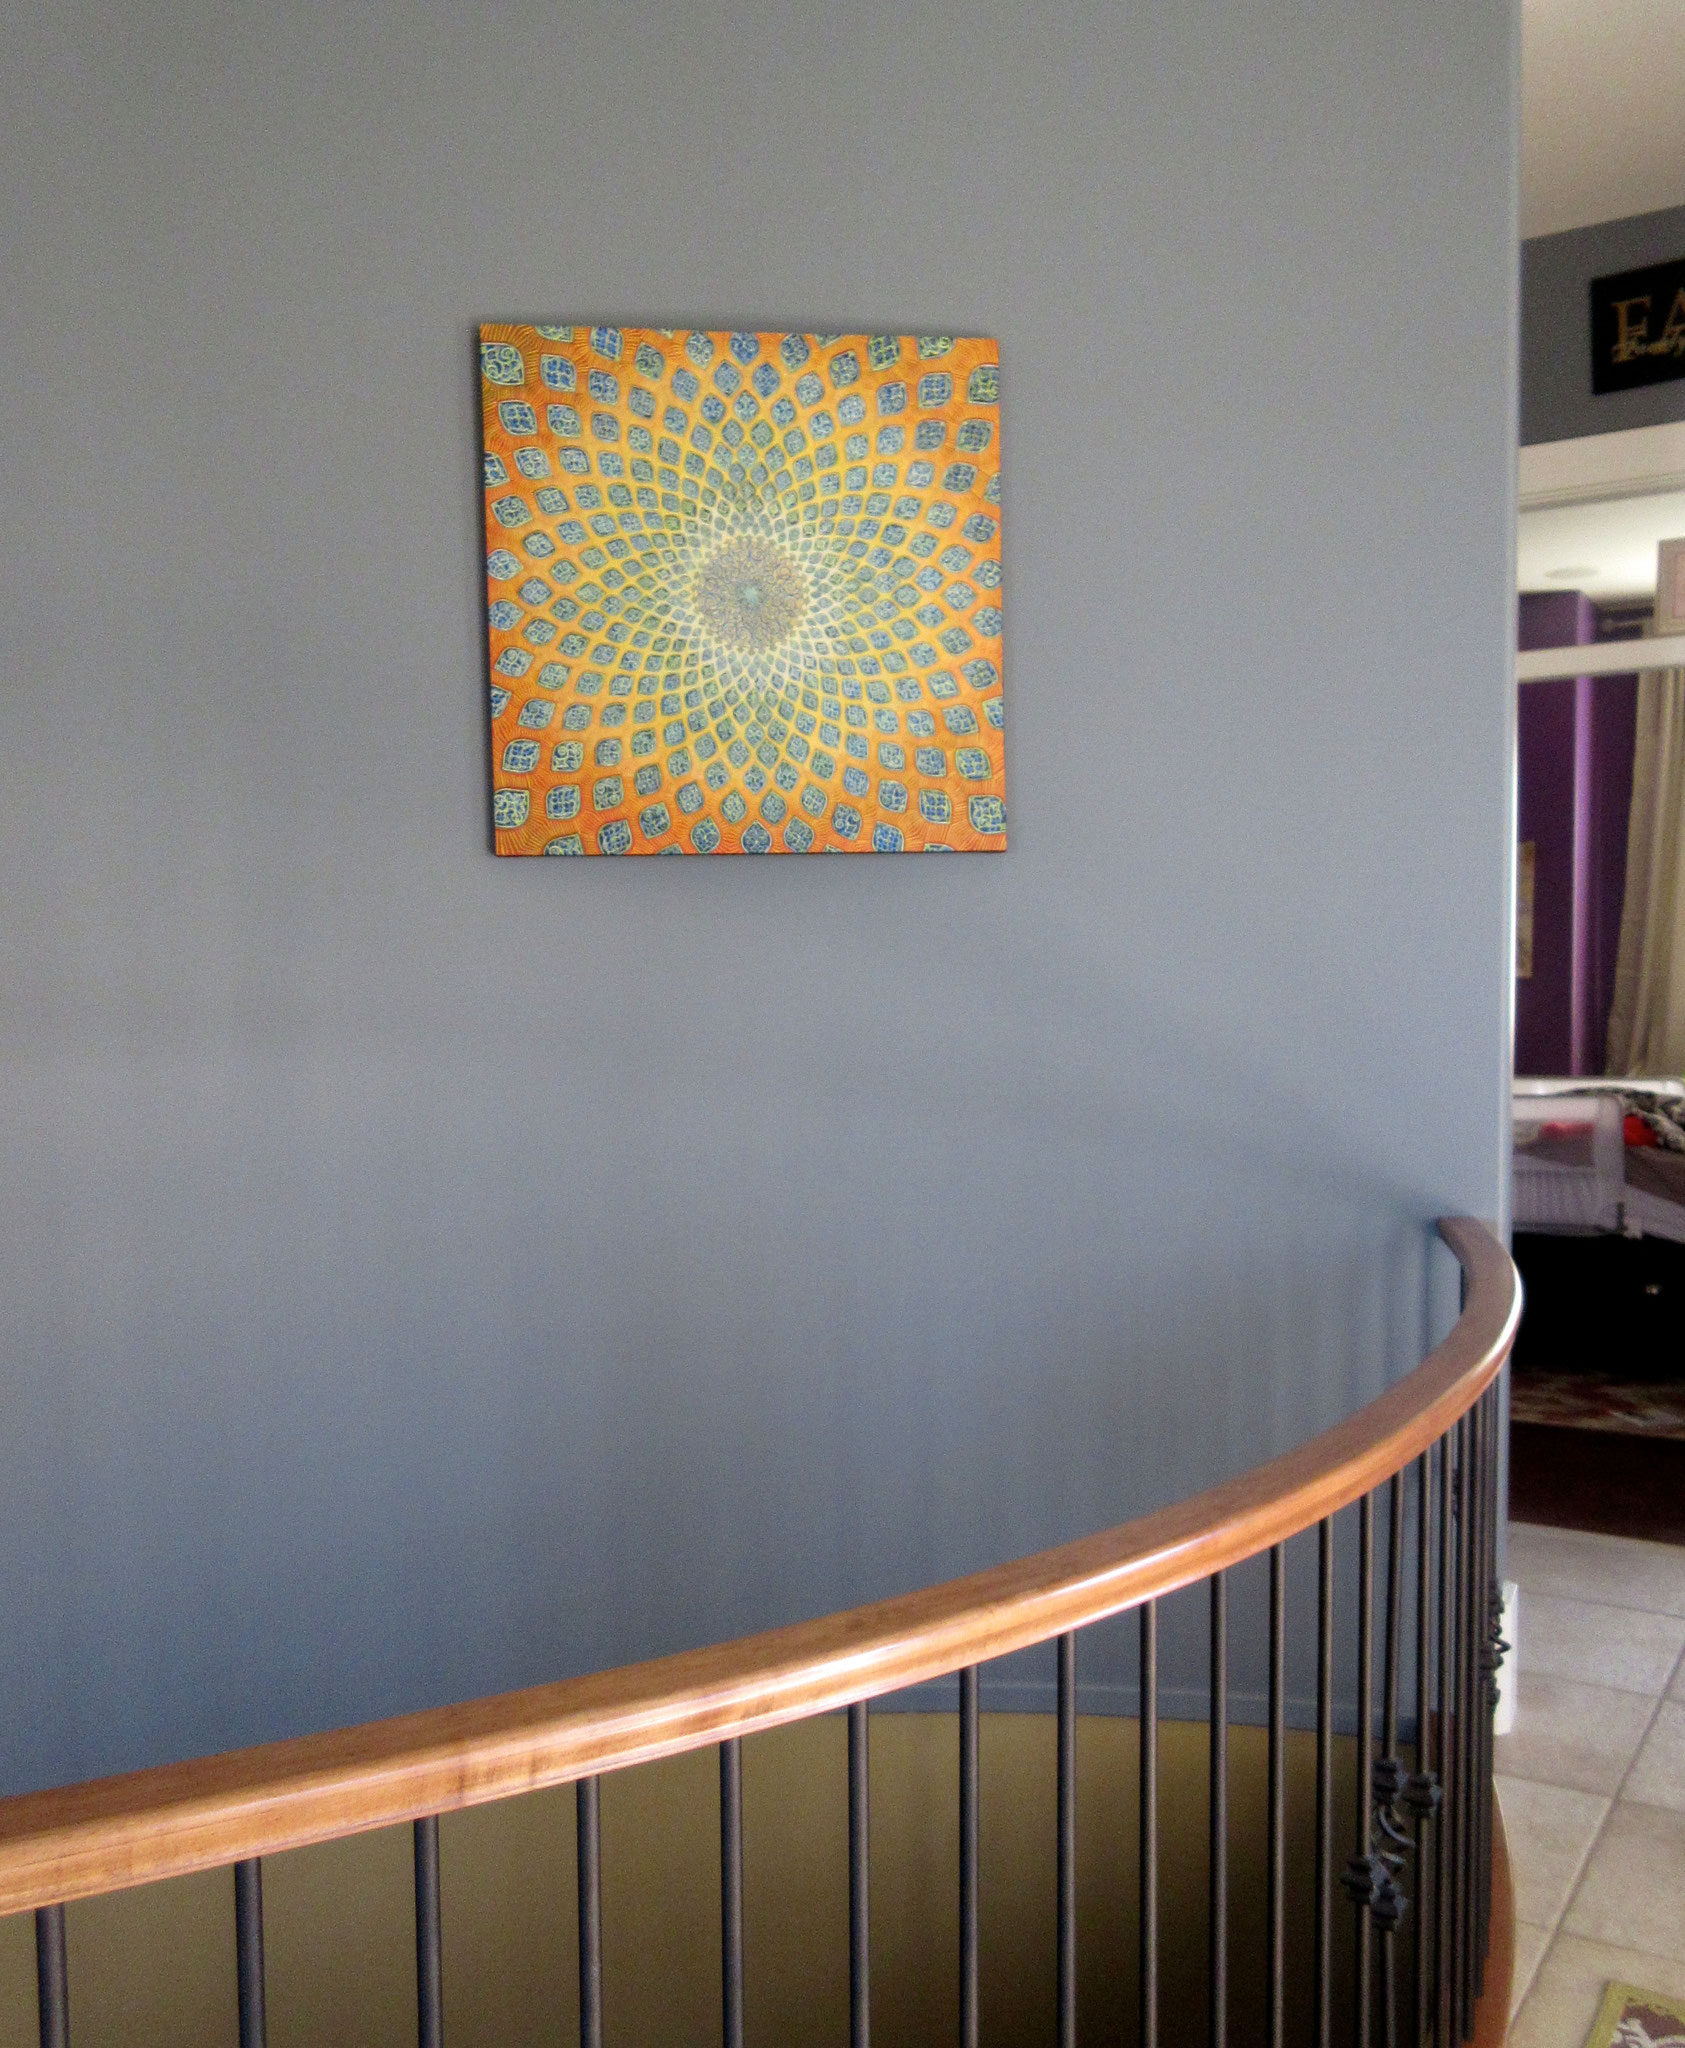 My 2015  "The Sun" painting (Part 1 of a Diptych) hanging in its new home!